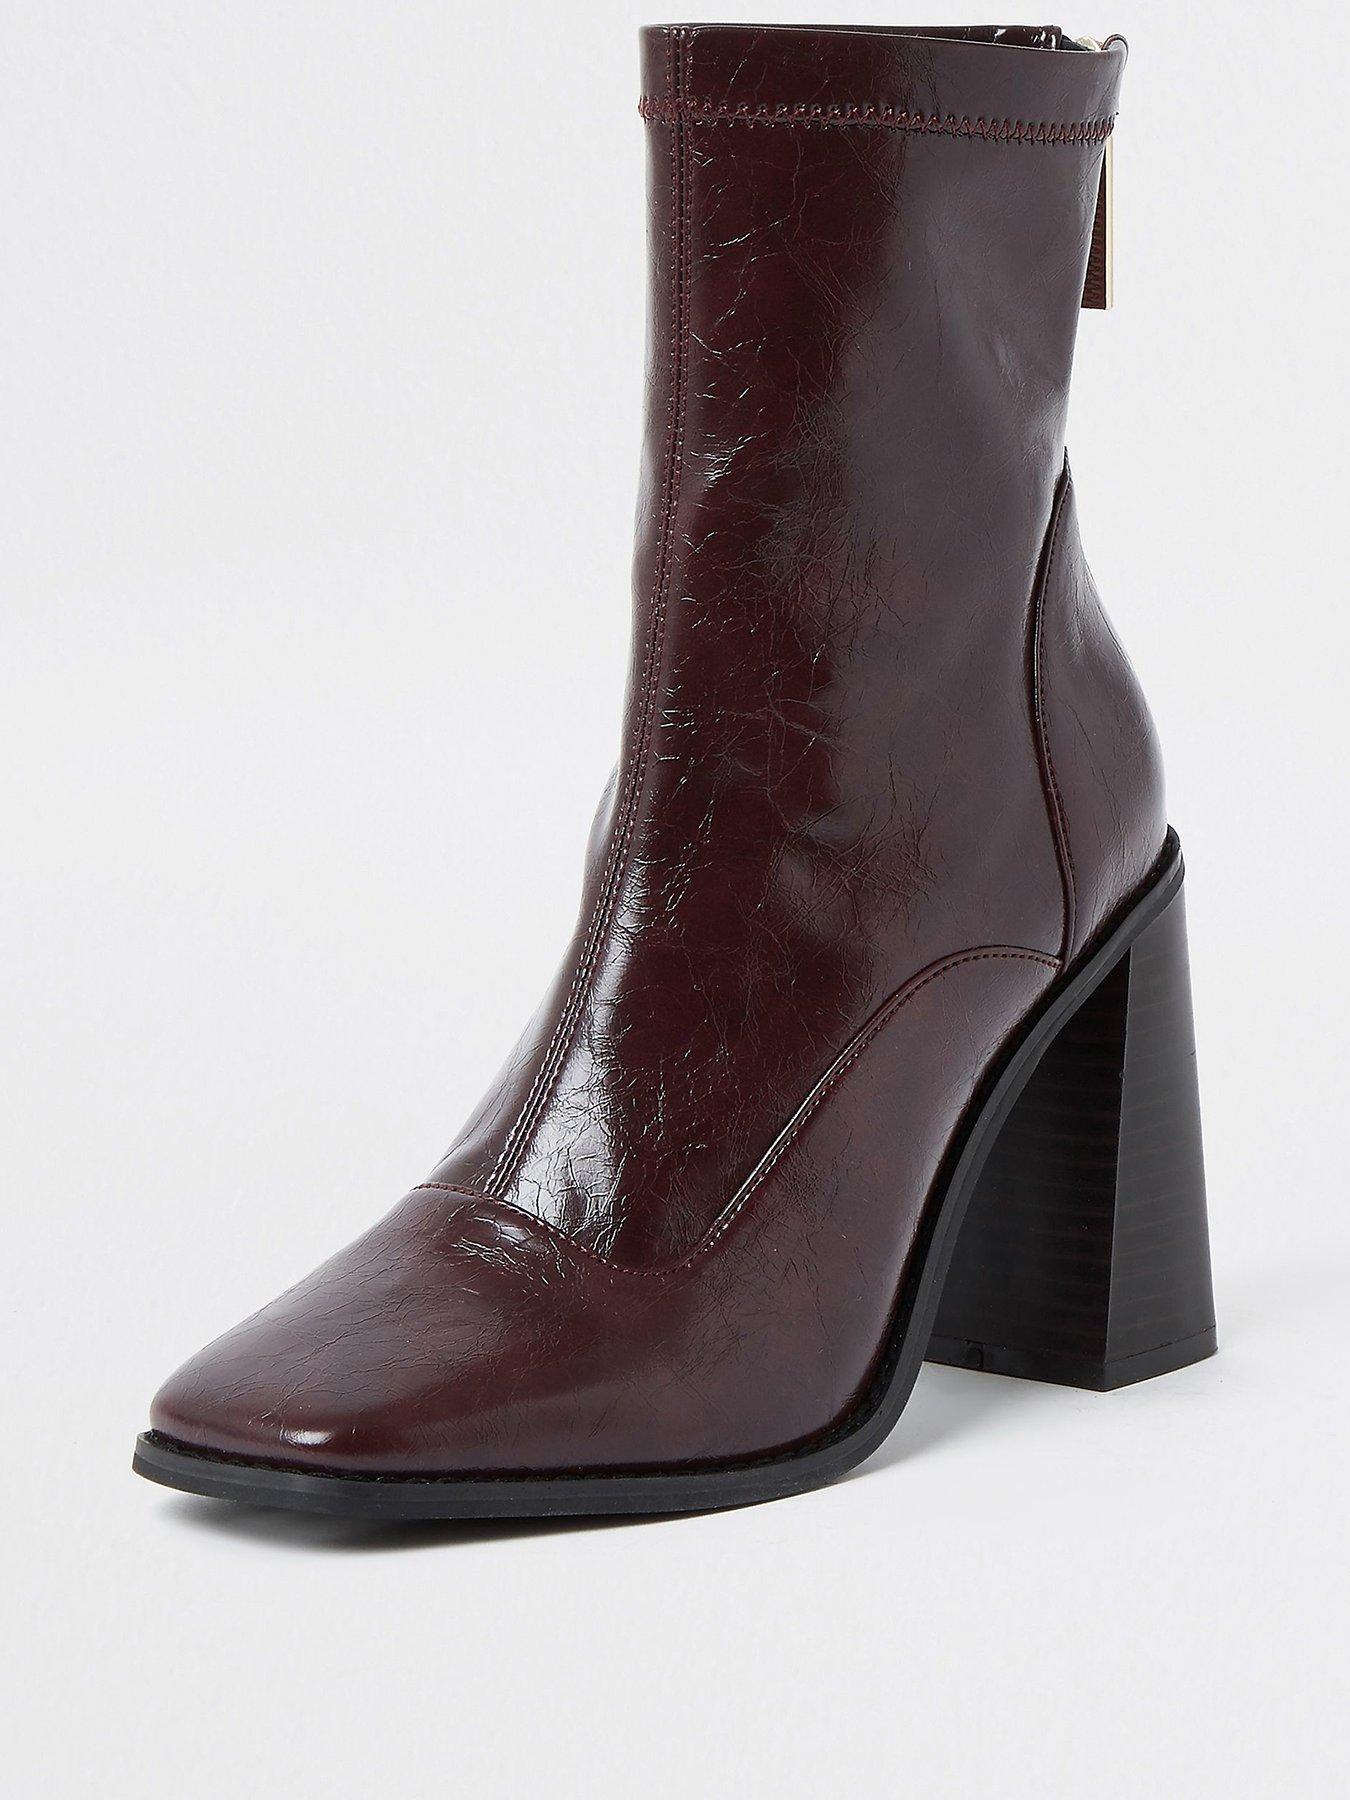 river island boots sale womens